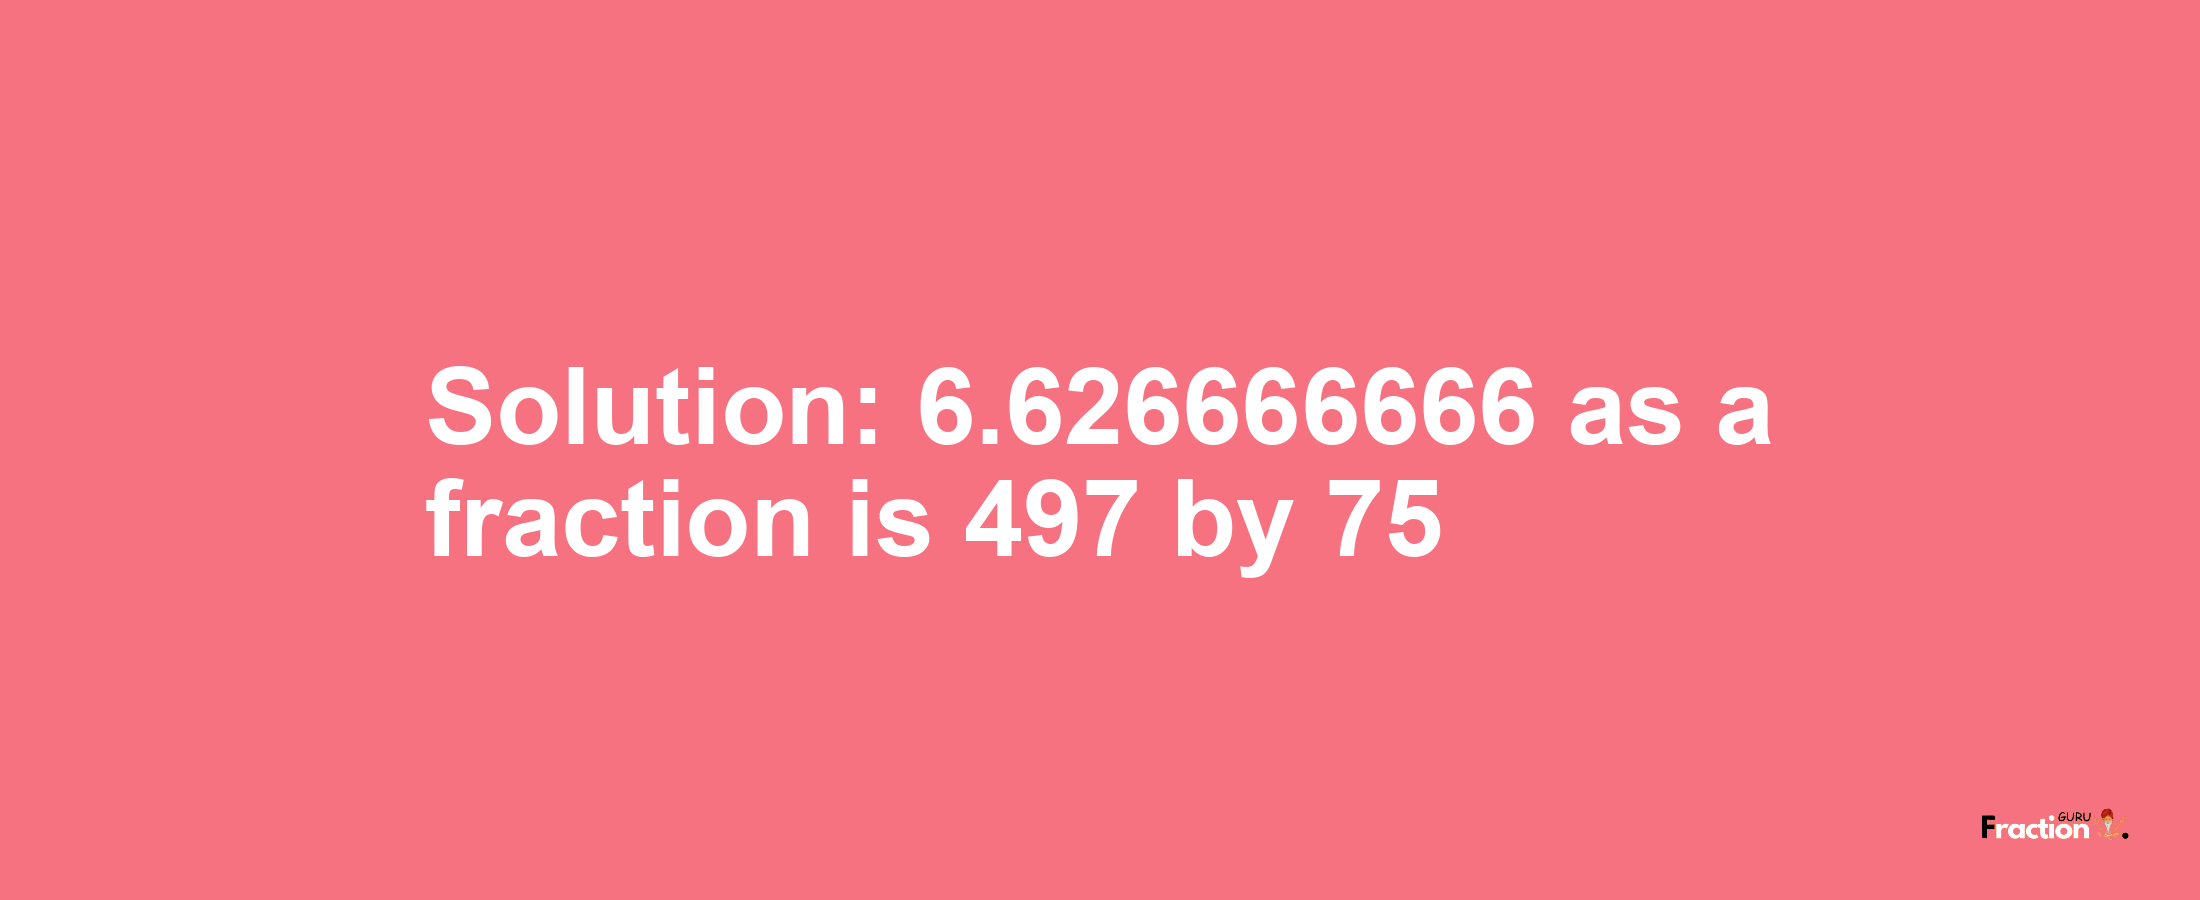 Solution:6.626666666 as a fraction is 497/75